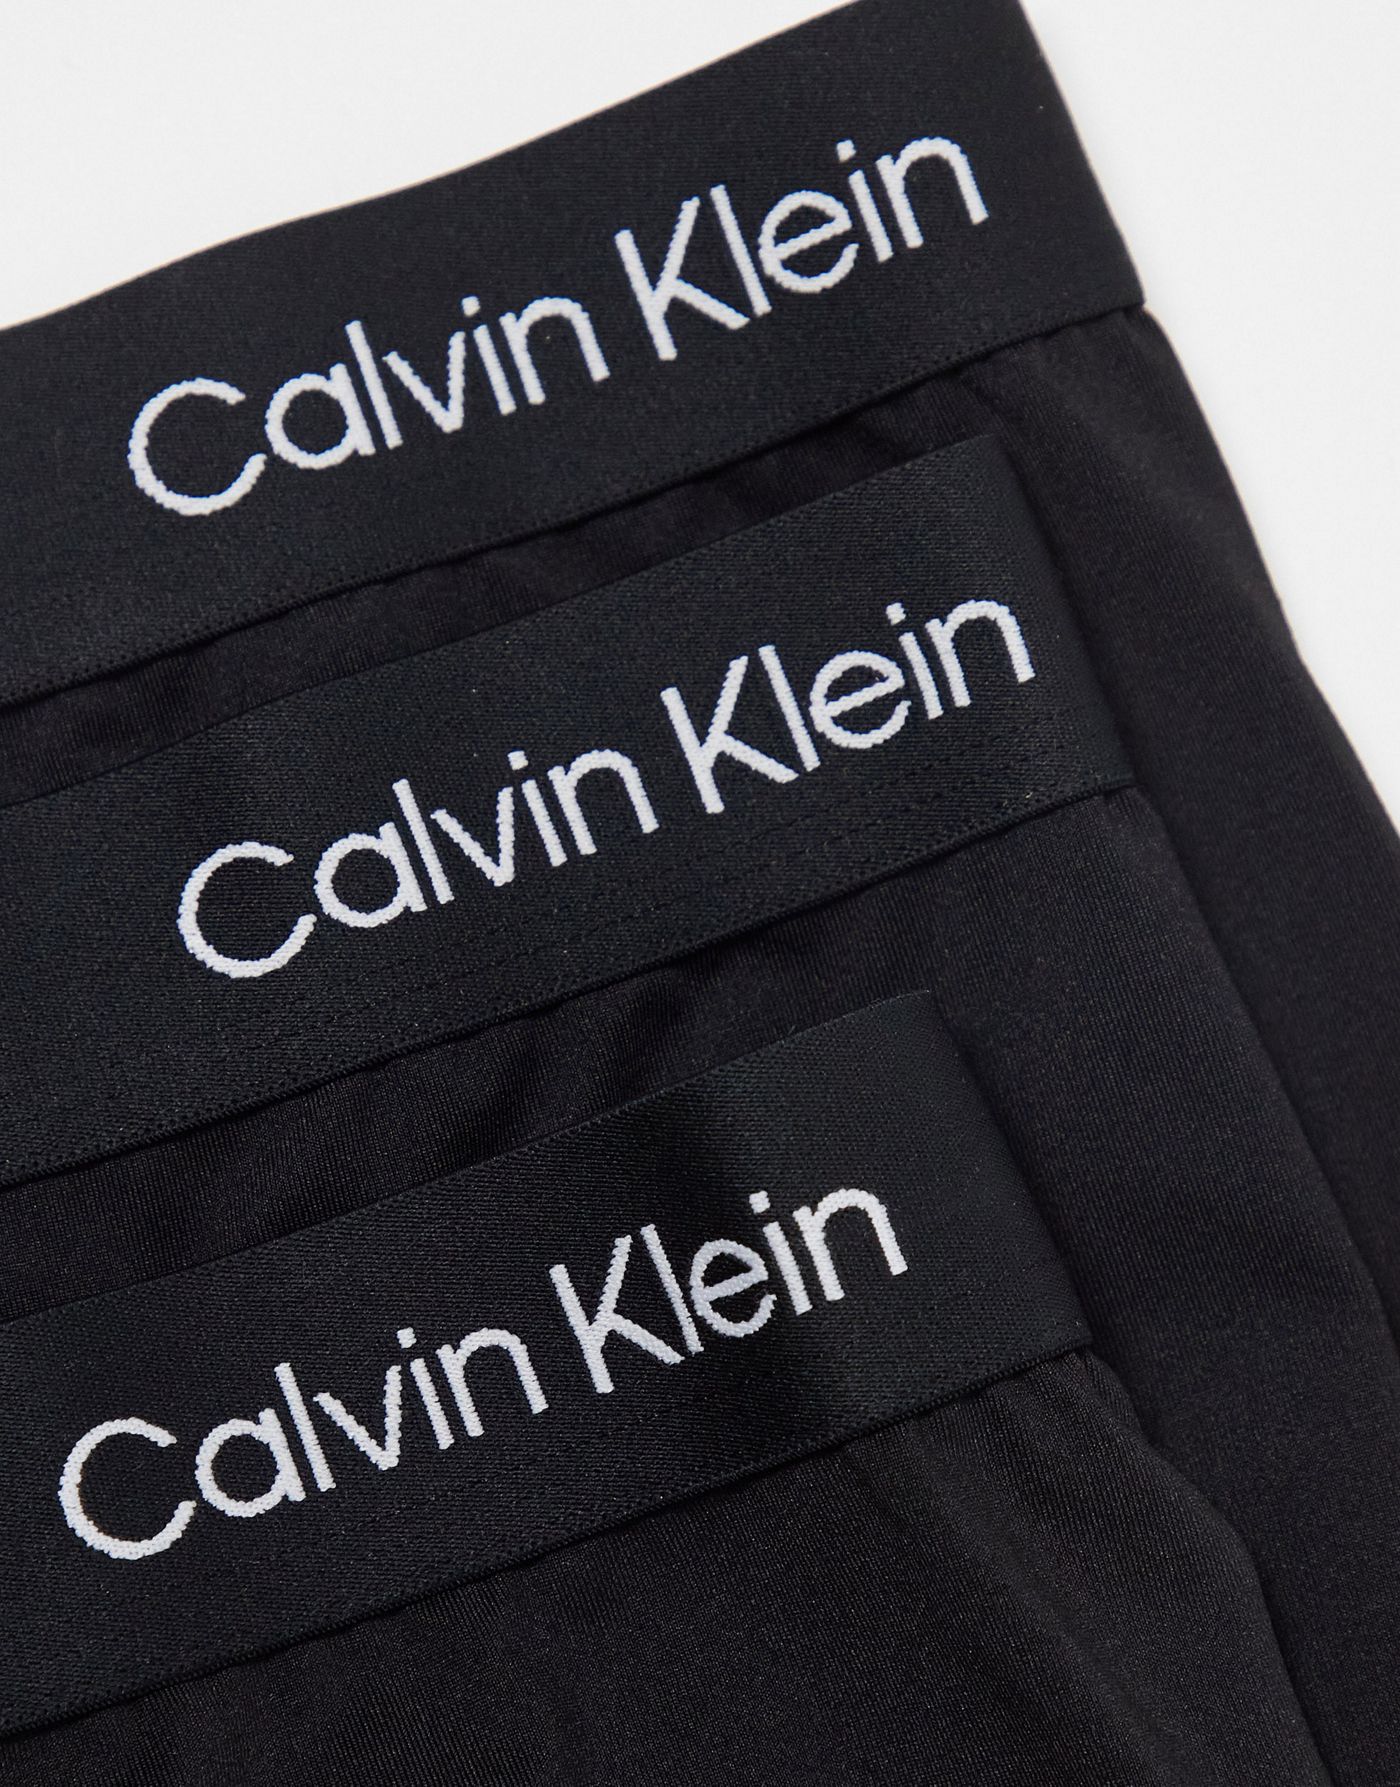 Calvin Klein CK 96 3 pack cotton low rise trunks in black